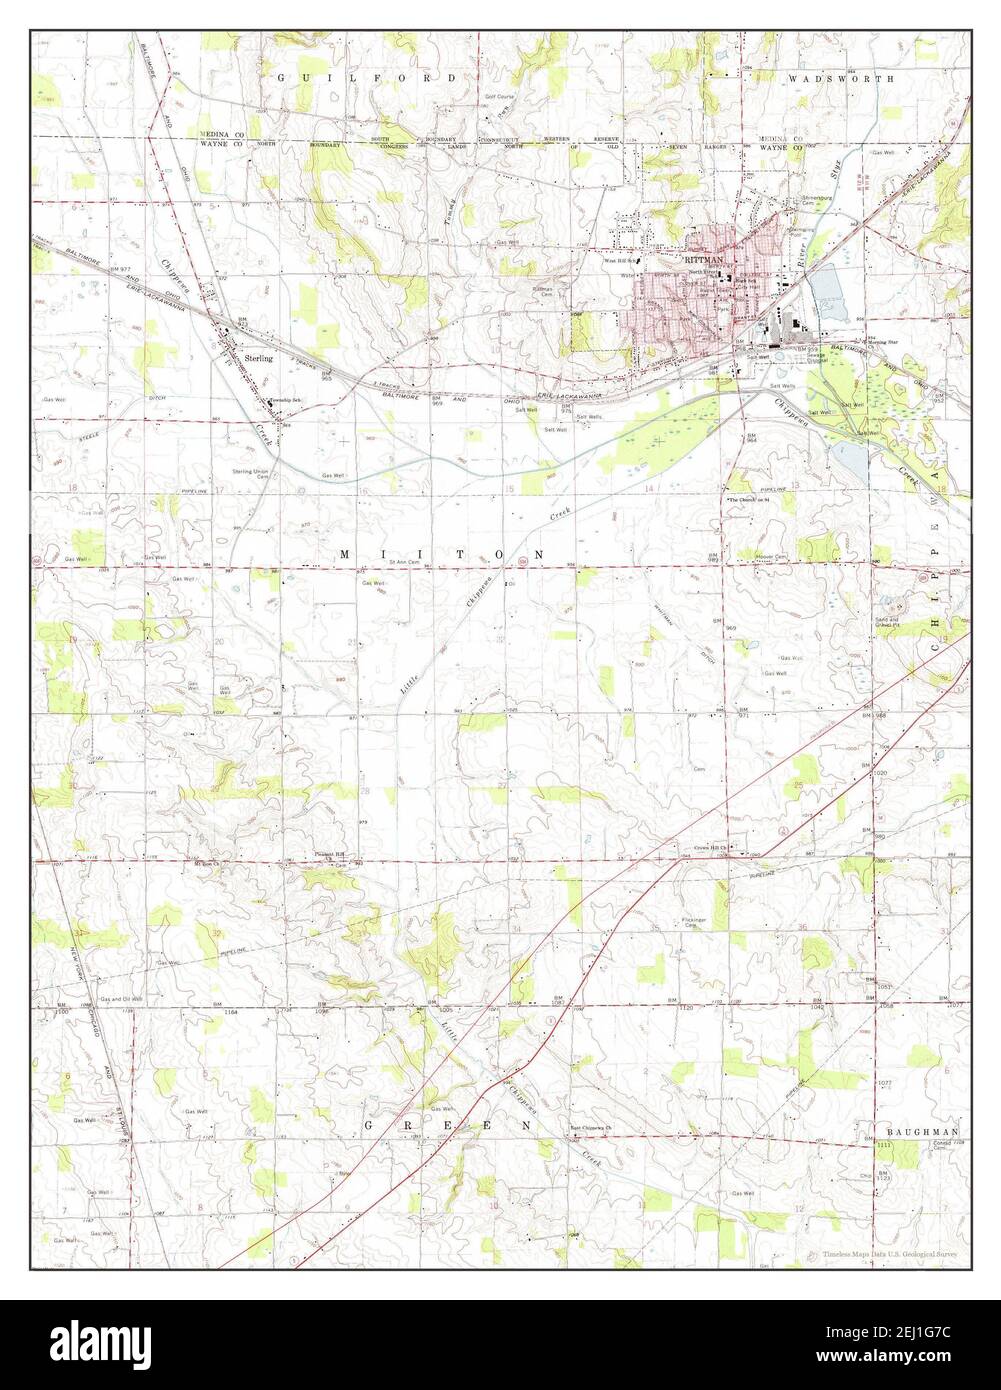 Rittman Ohio Map 1961 1 24000 United States Of America By Timeless